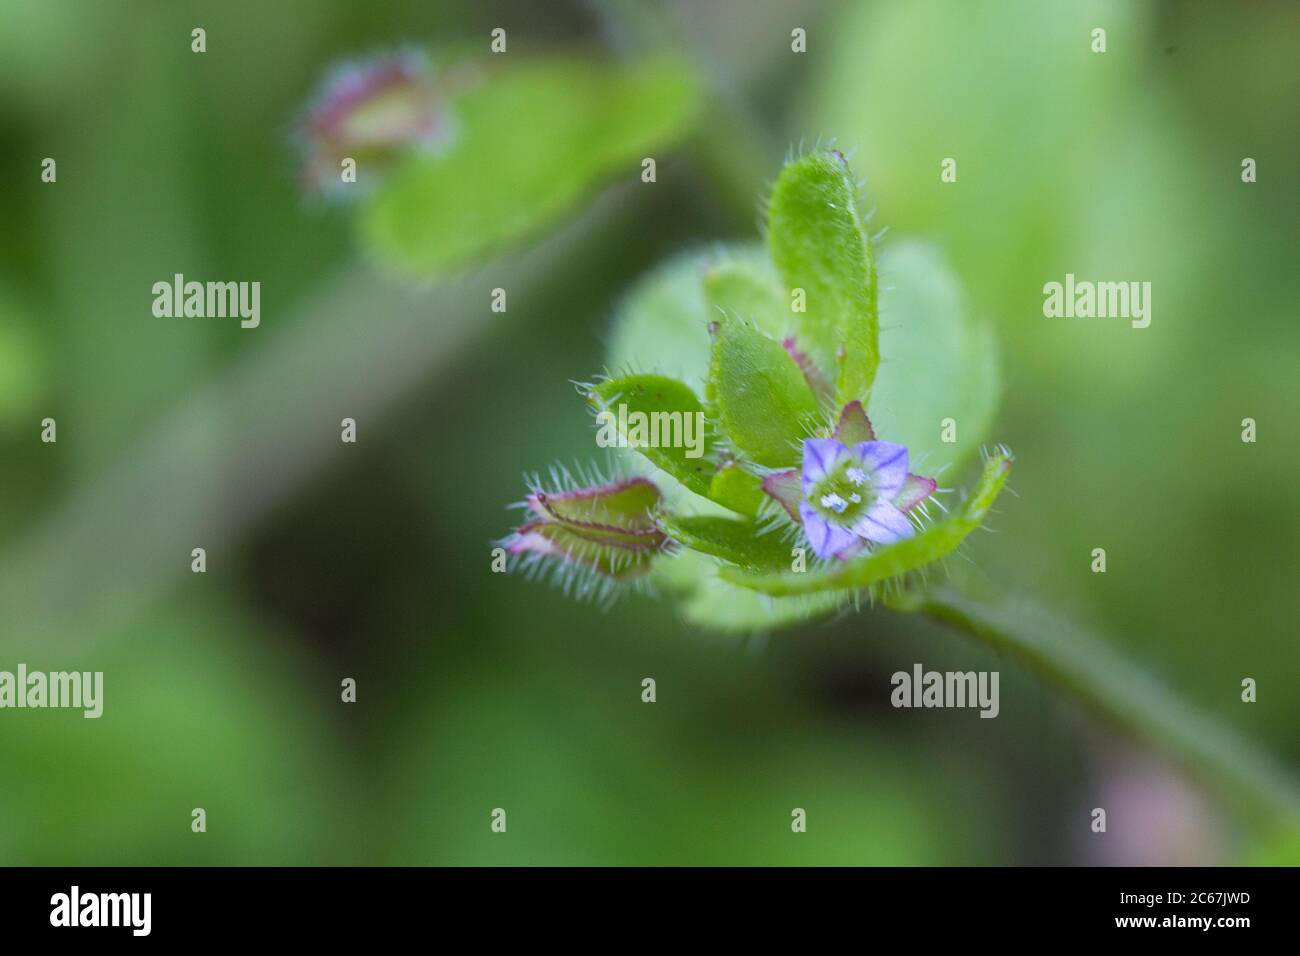 Ivy-leaved Speedwell flowers Stock Photo